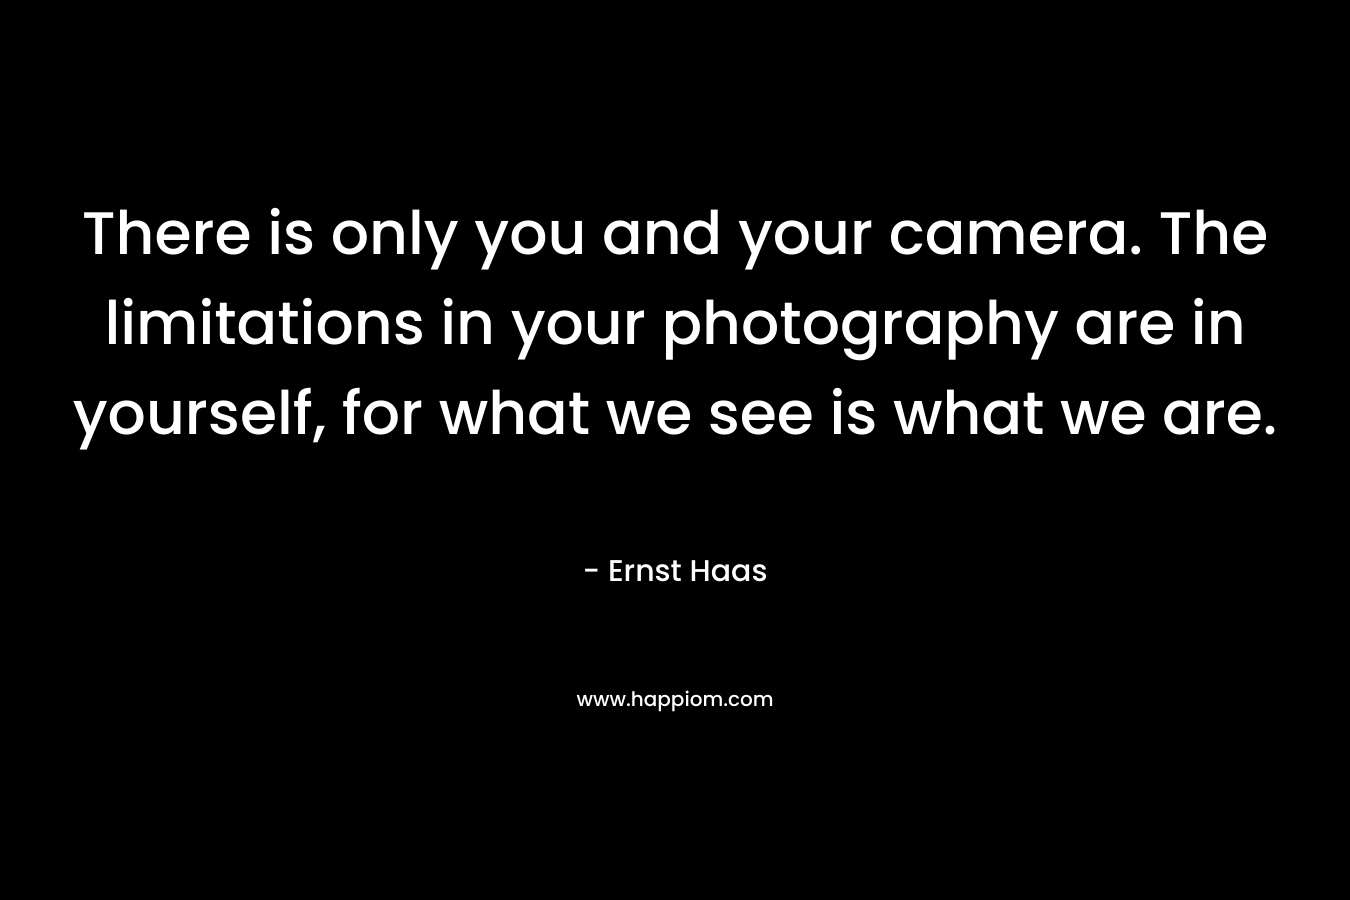 There is only you and your camera. The limitations in your photography are in yourself, for what we see is what we are. – Ernst Haas